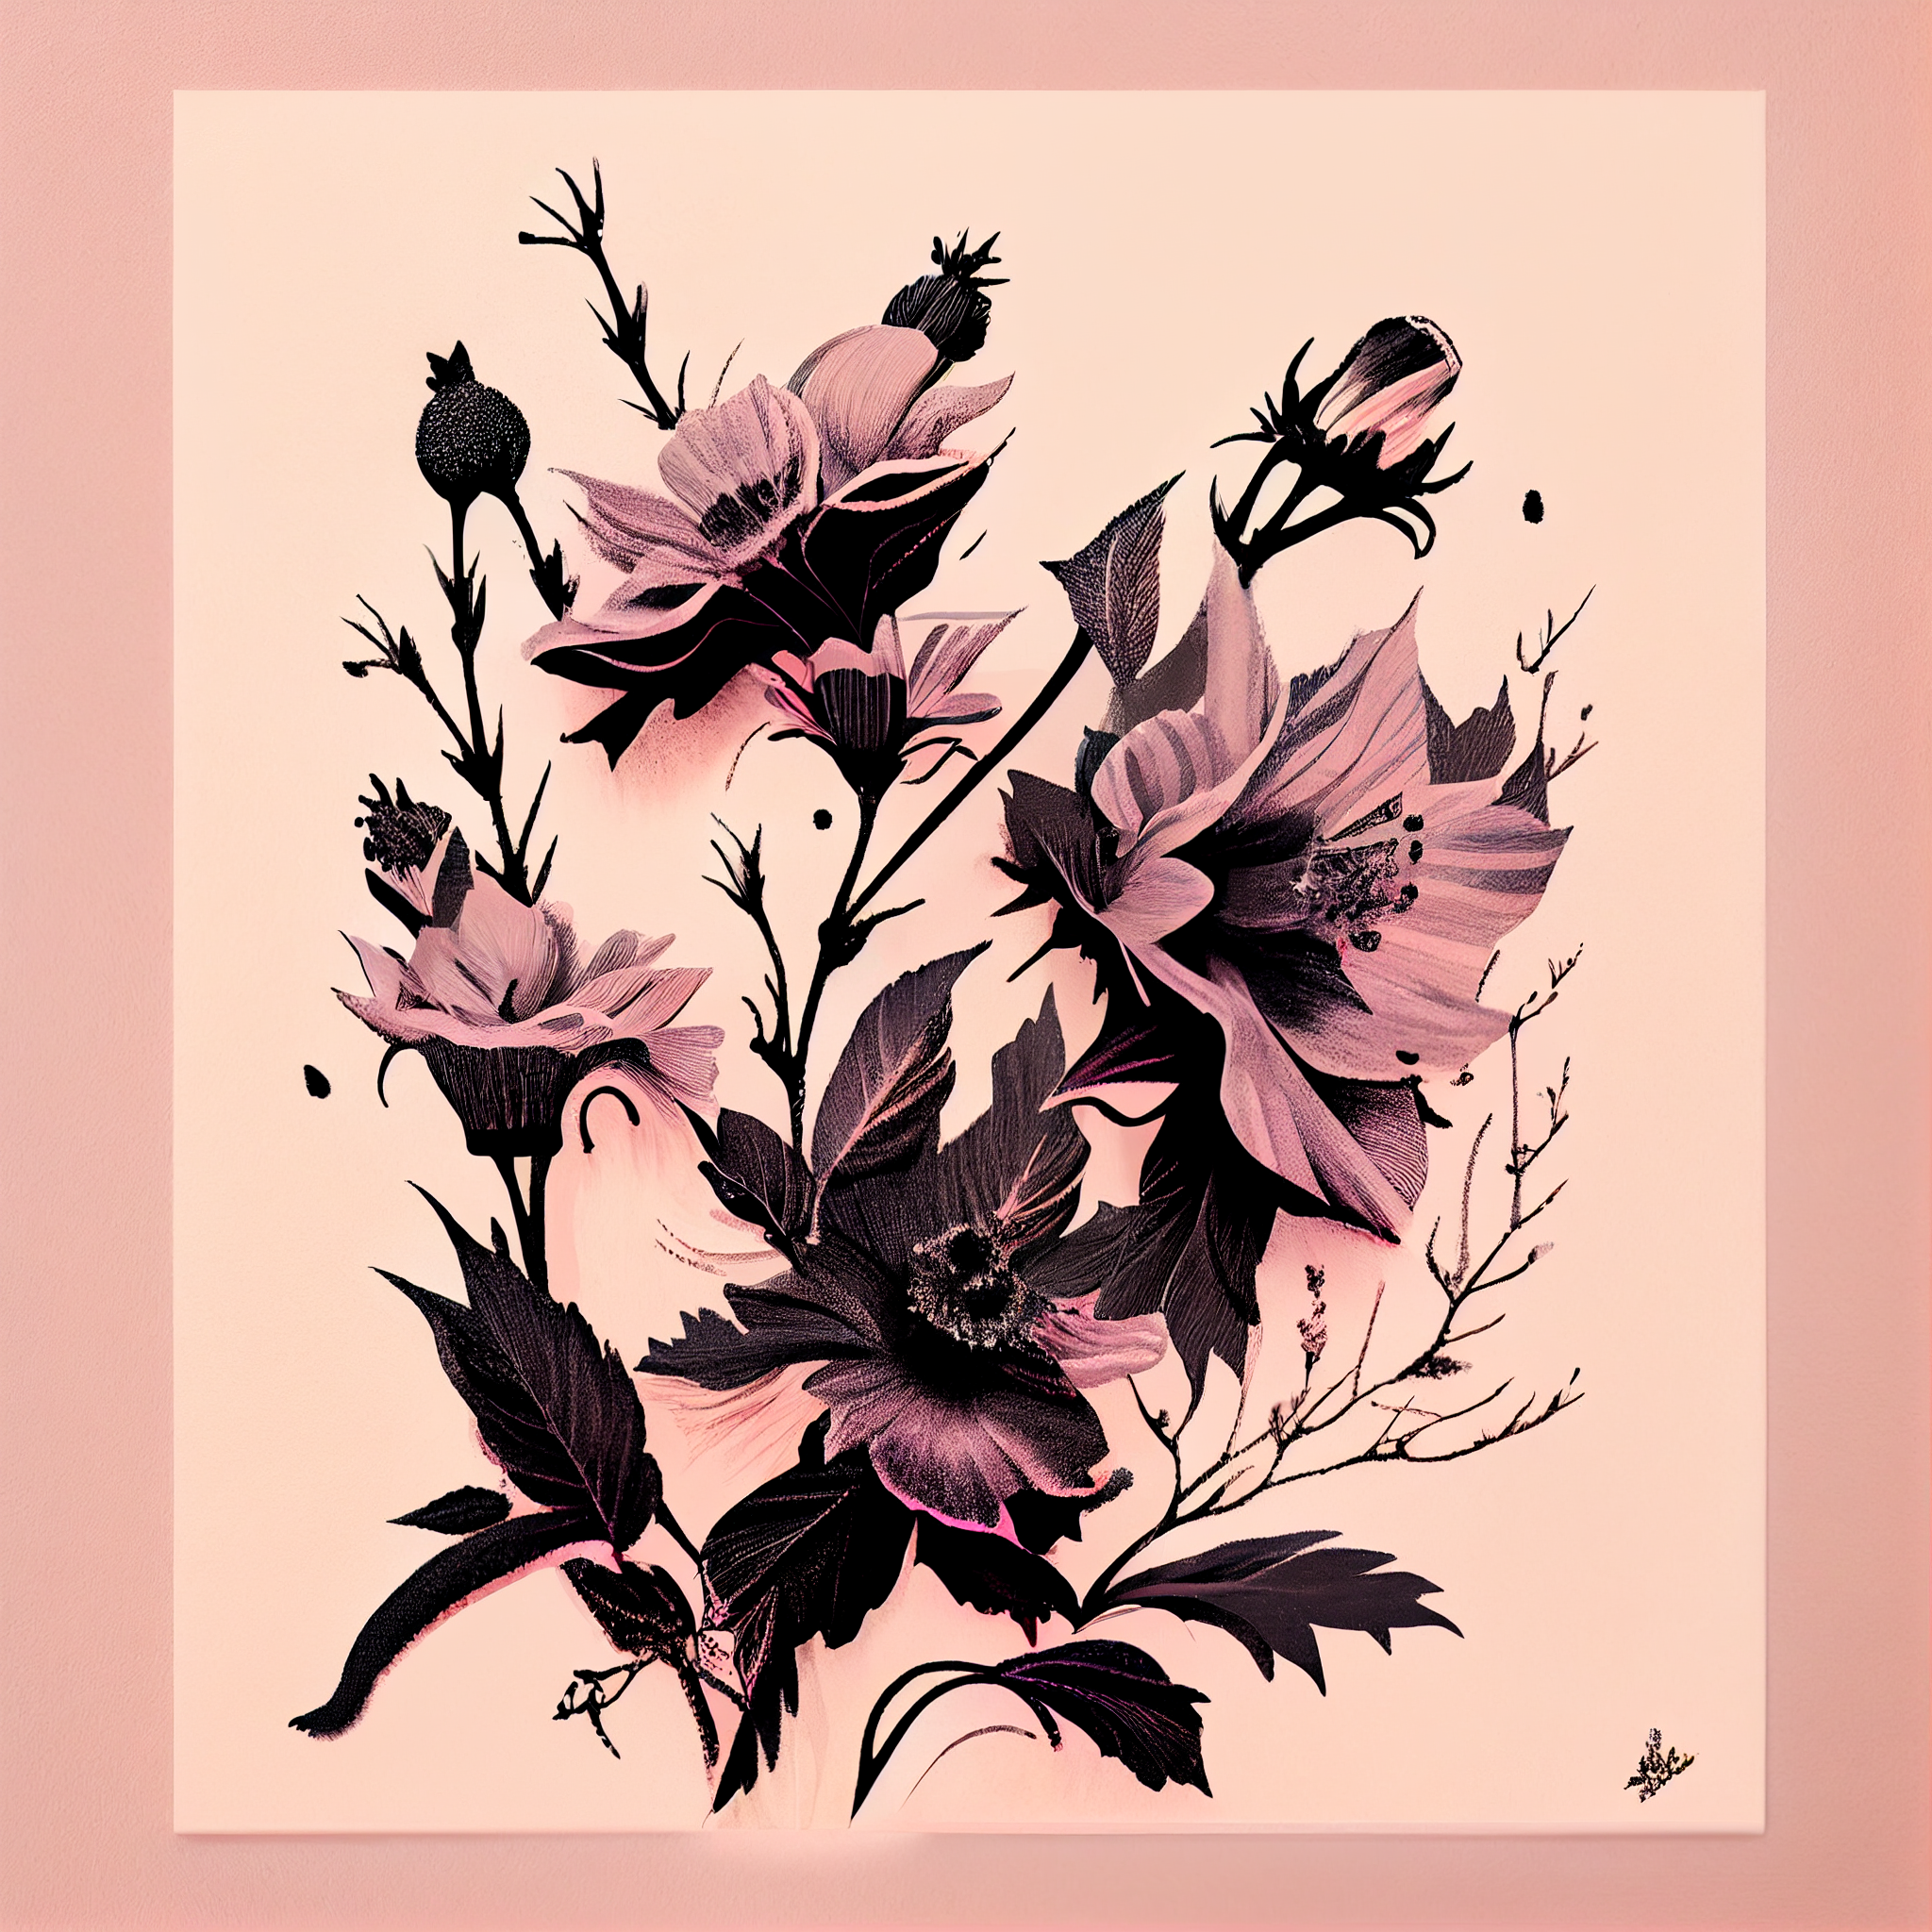 Black Blooms on Pastel Pink - A Monochromatic Floral Print